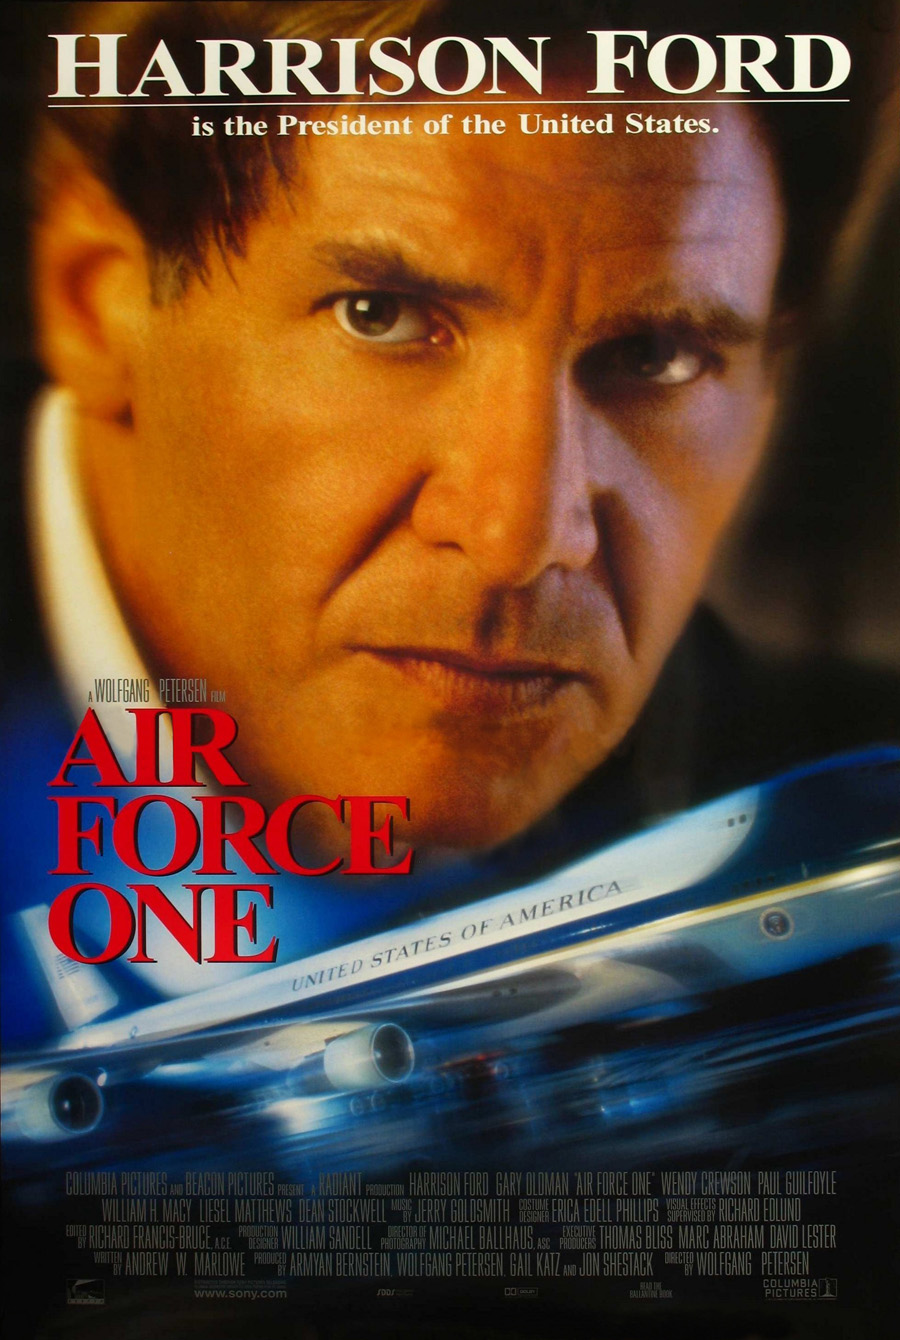 AIR FORCE ONE MOVIE POSTER 2 Sided ORIGINAL FINAL VF 27x40 HARRISON